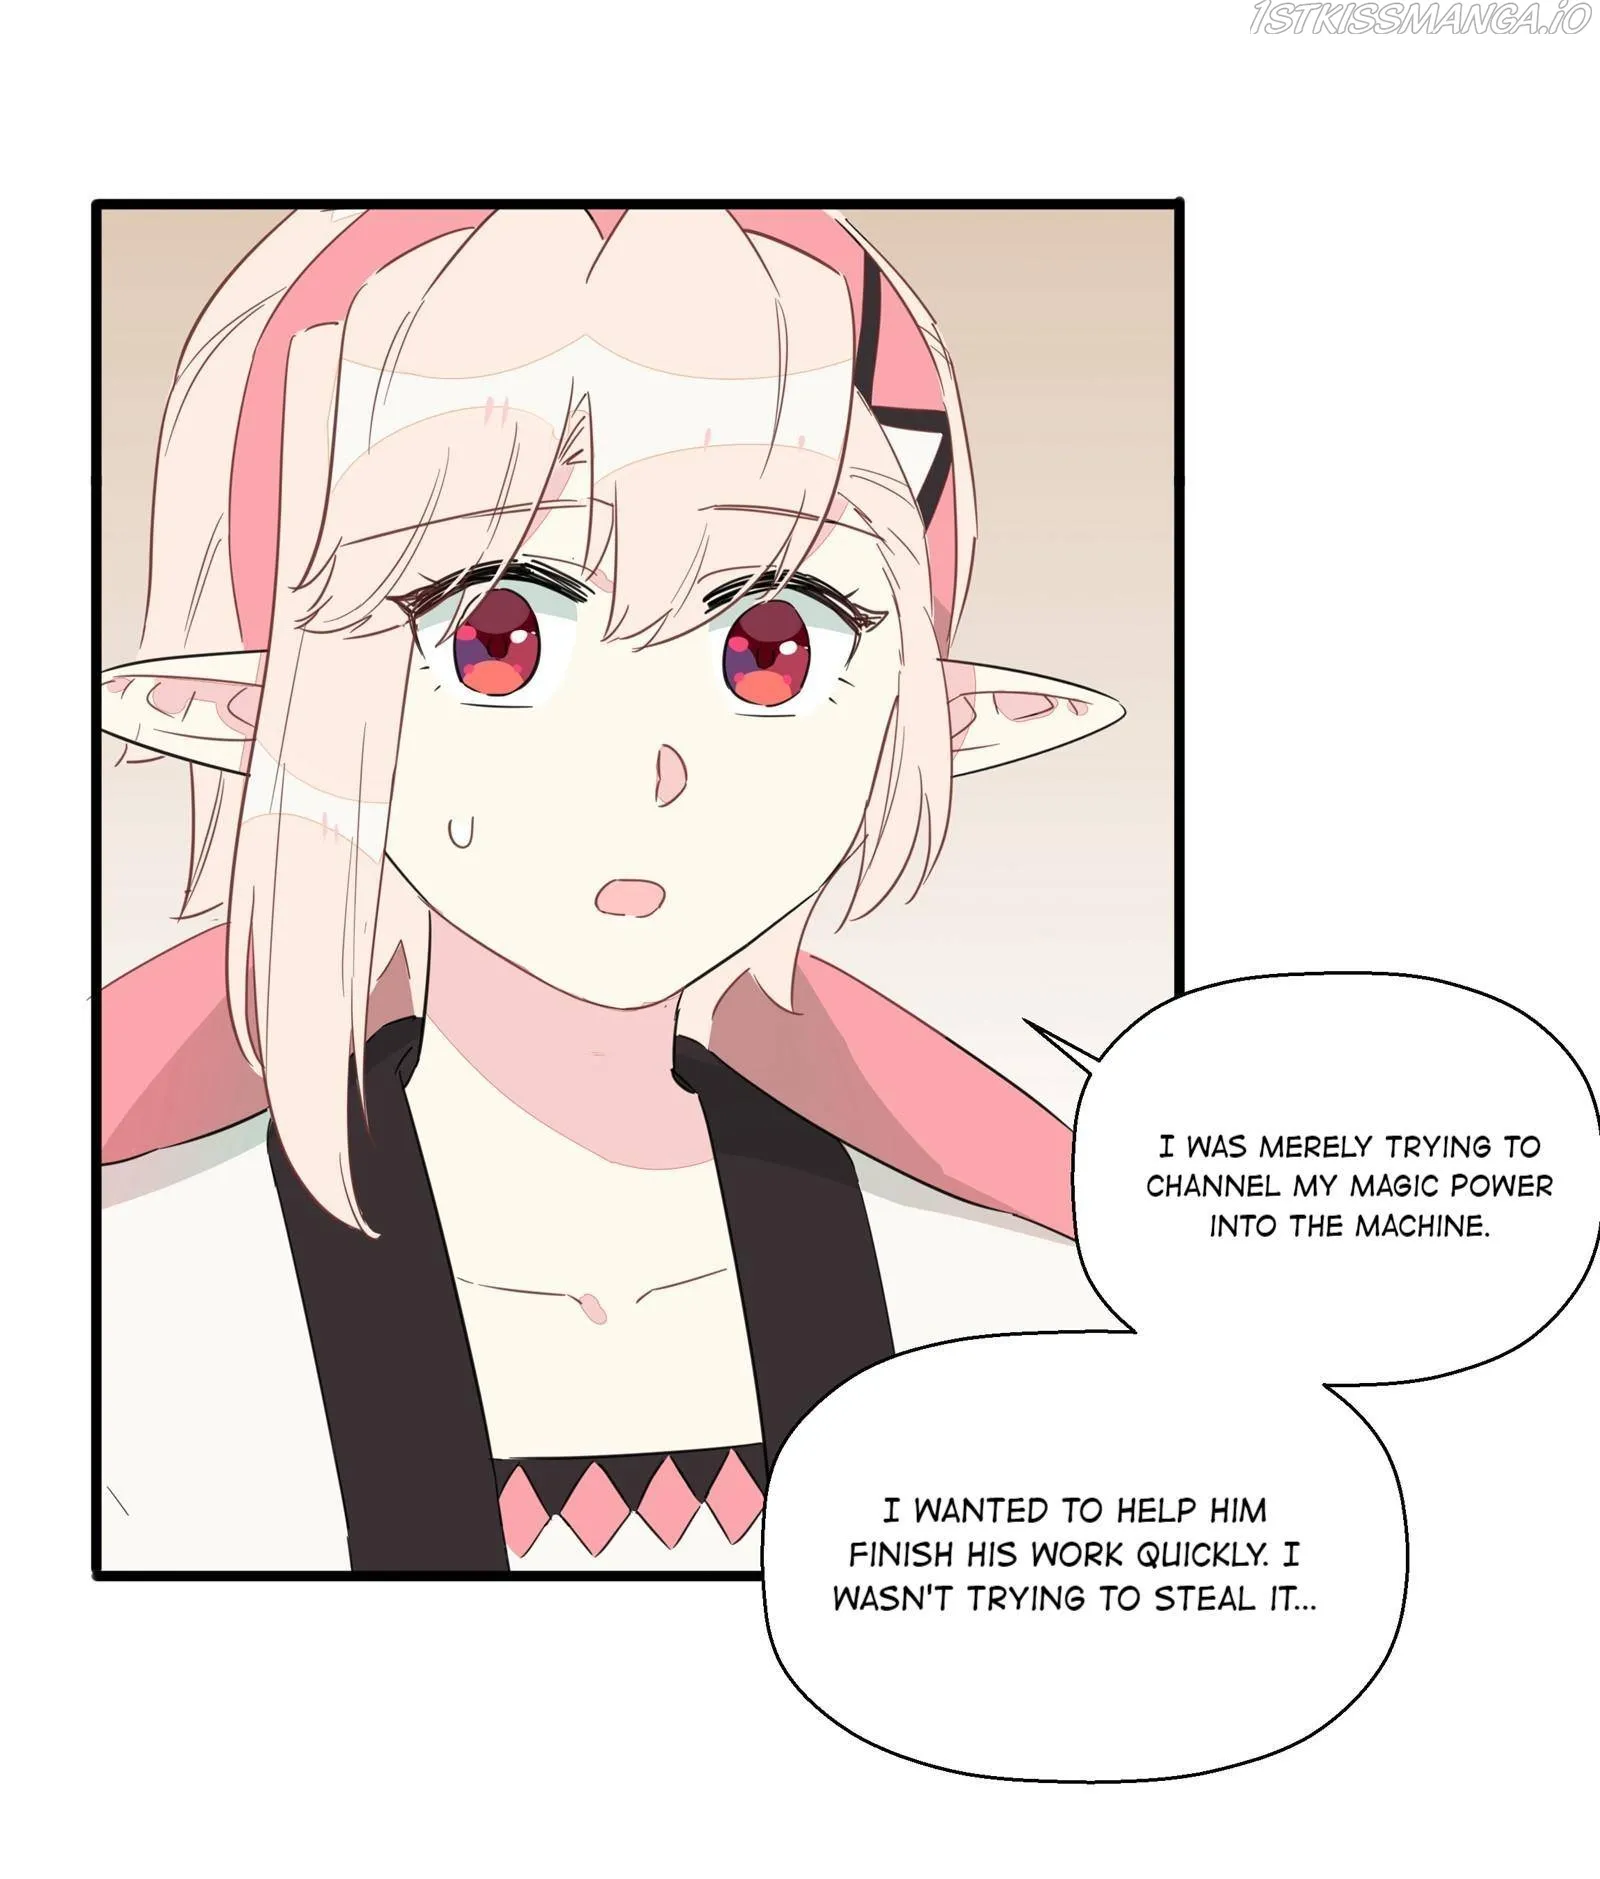 What Do I Do If I Signed A Marriage Contract With The Elf Princess? - Page 1